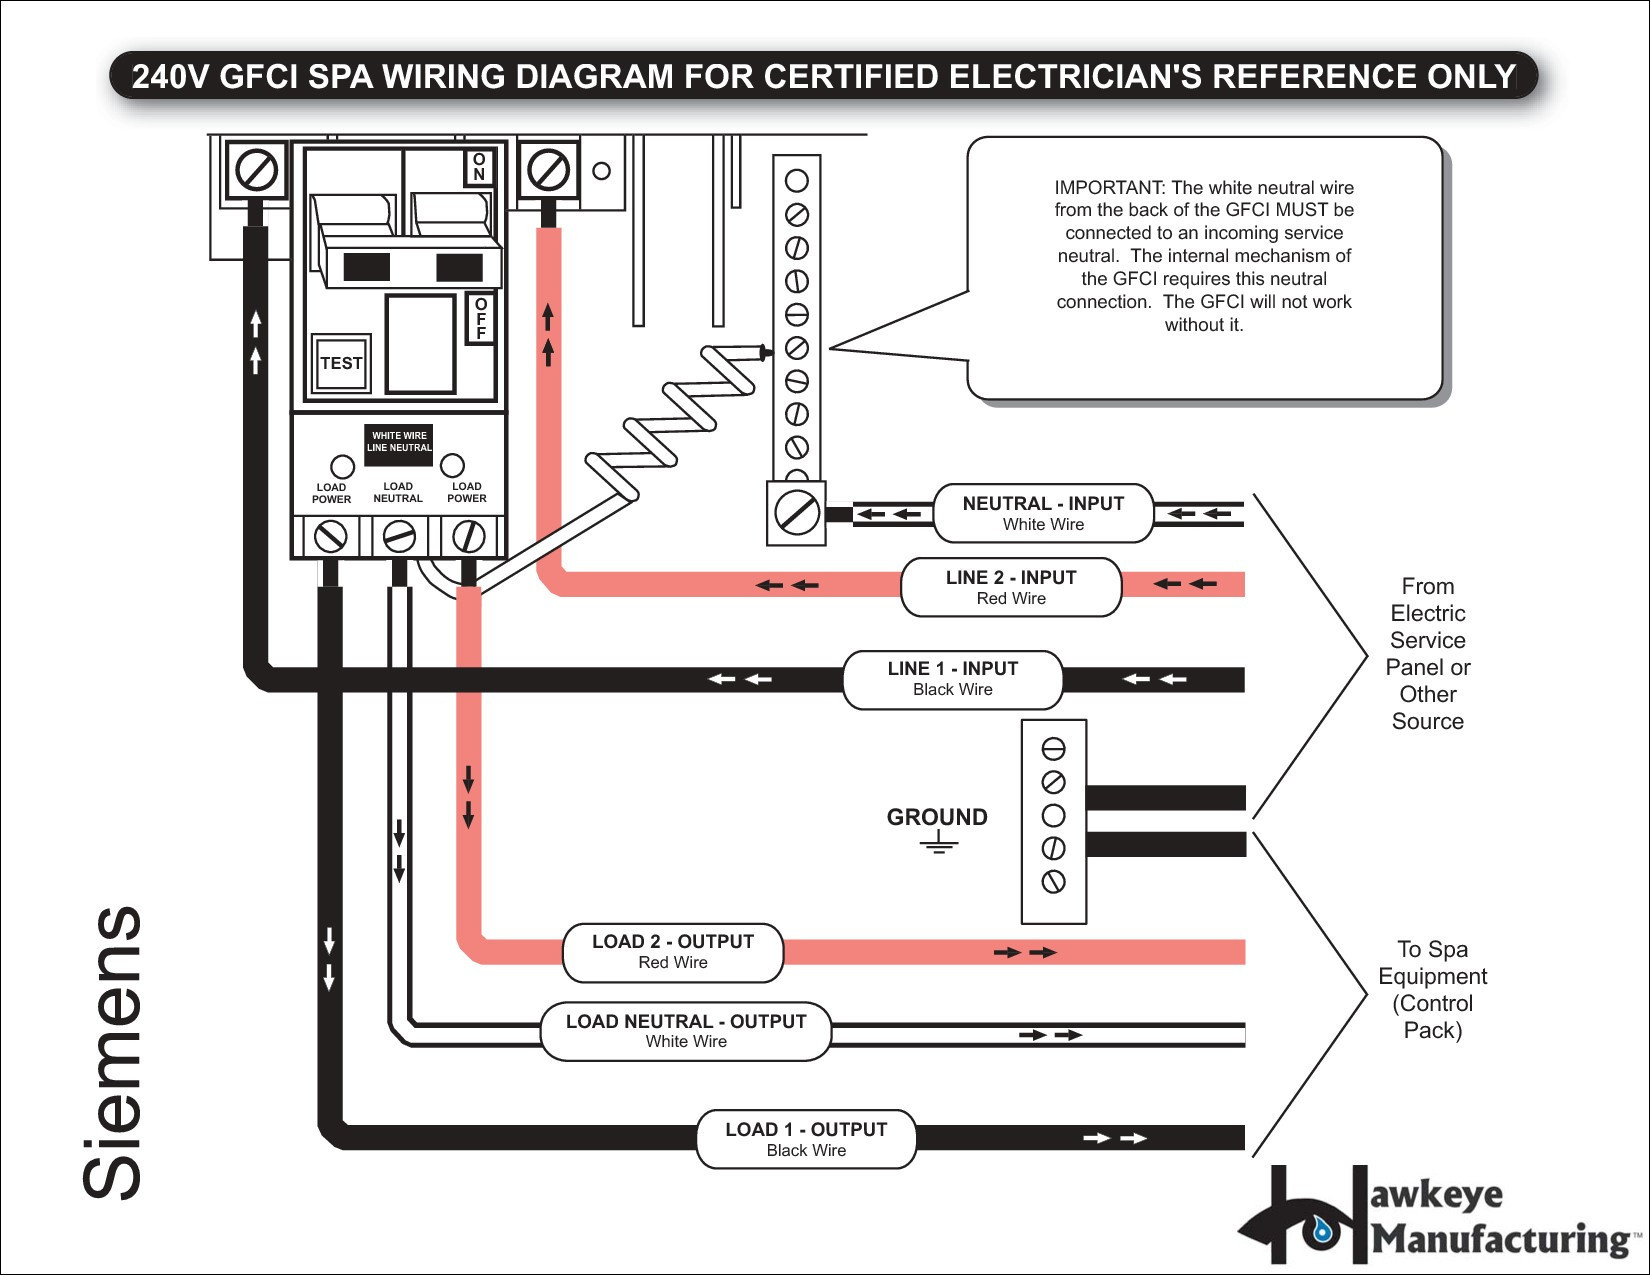 Sub Panel Wiring Diagram Wiring Diagram C Neutral Wire Will Be Connected To Wiring Diagram